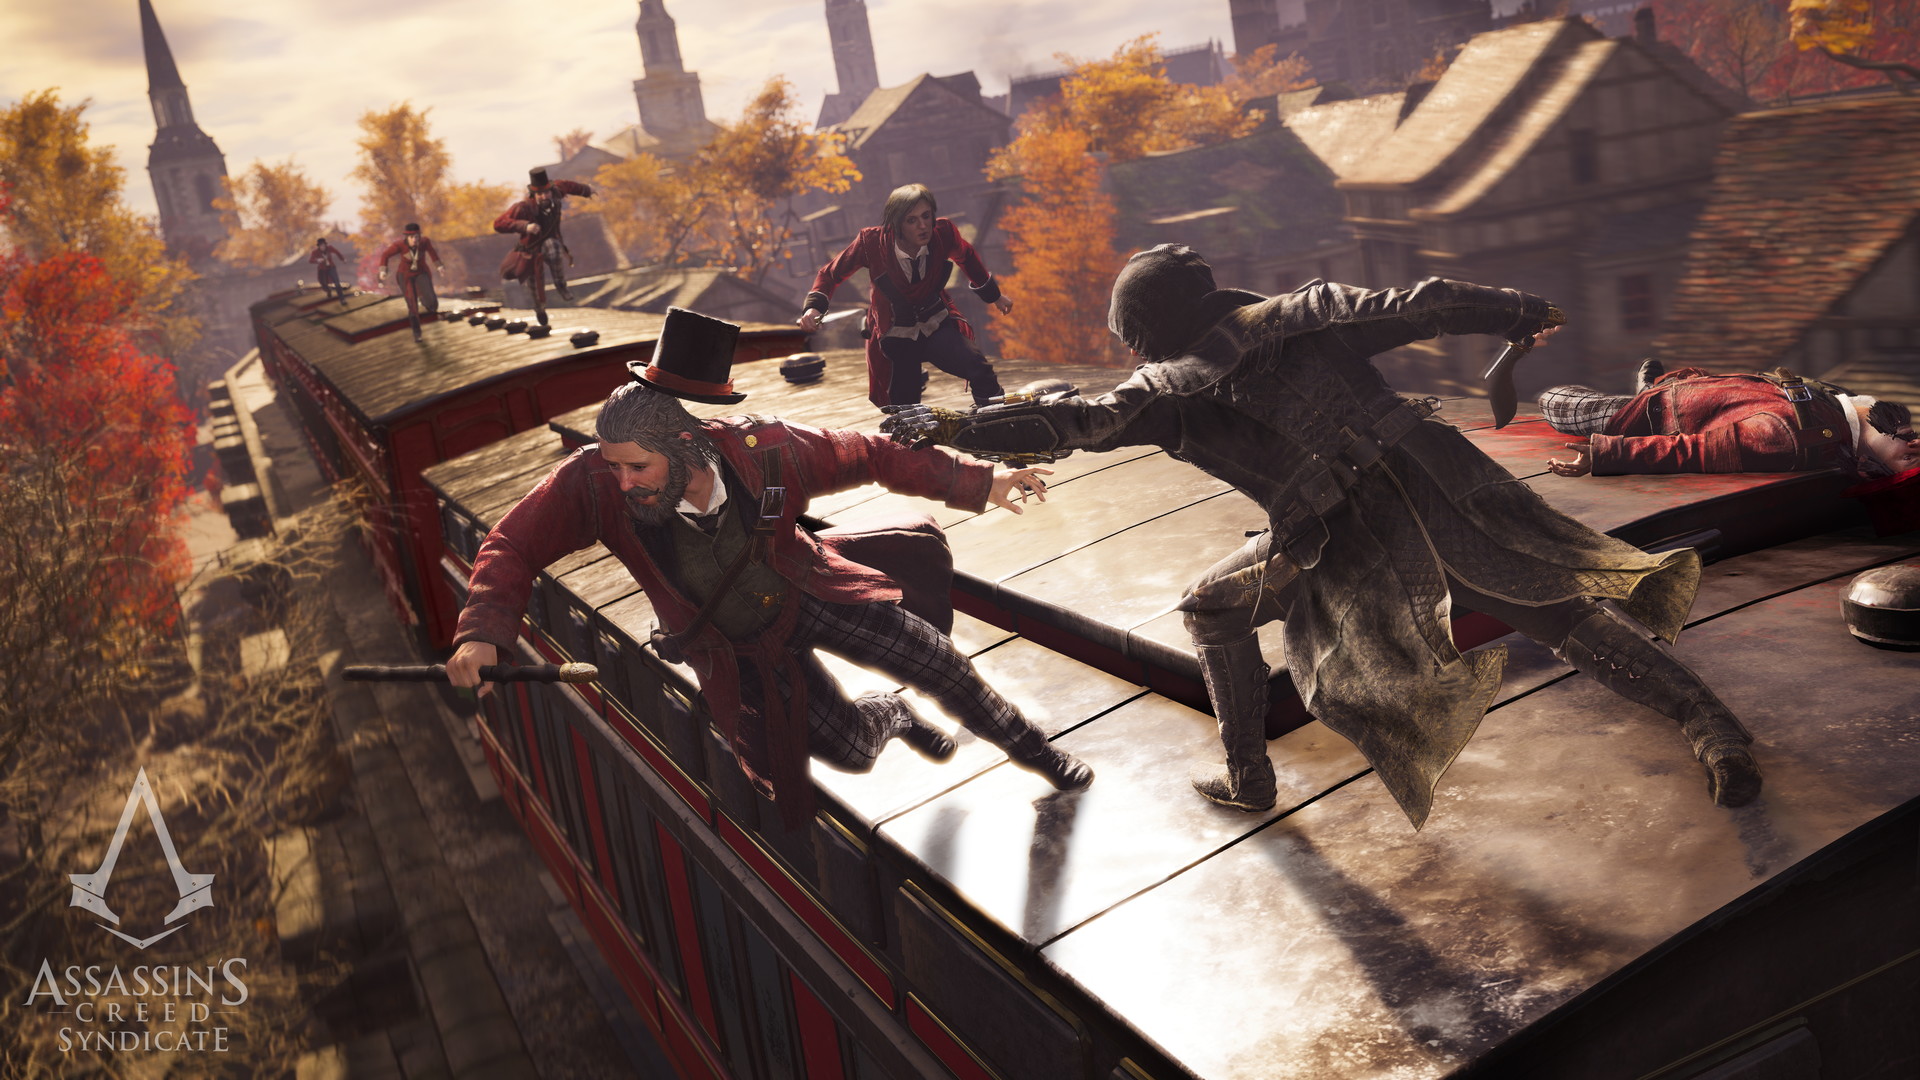 Assassin's Creed: Syndicate - screenshot 9